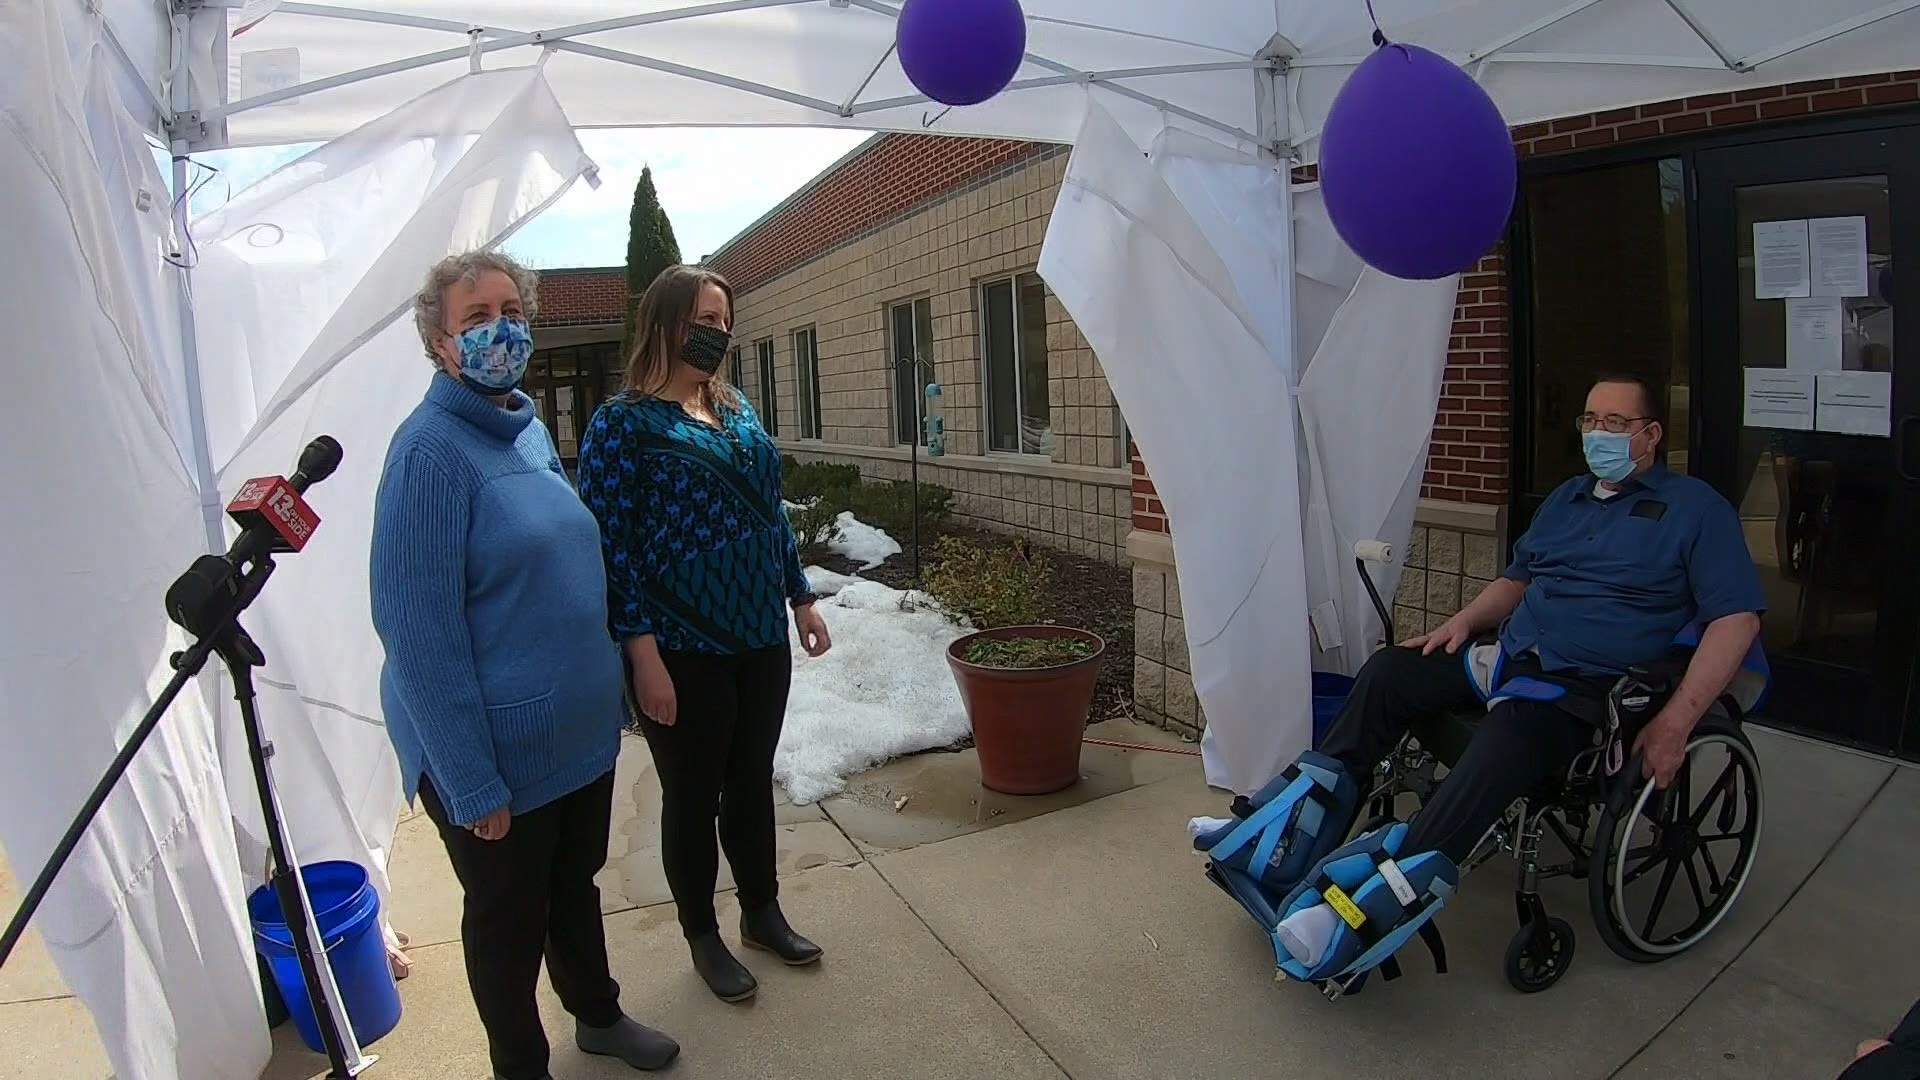 For the first time in several months, indoor nursing home visits are allowed in Michigan.